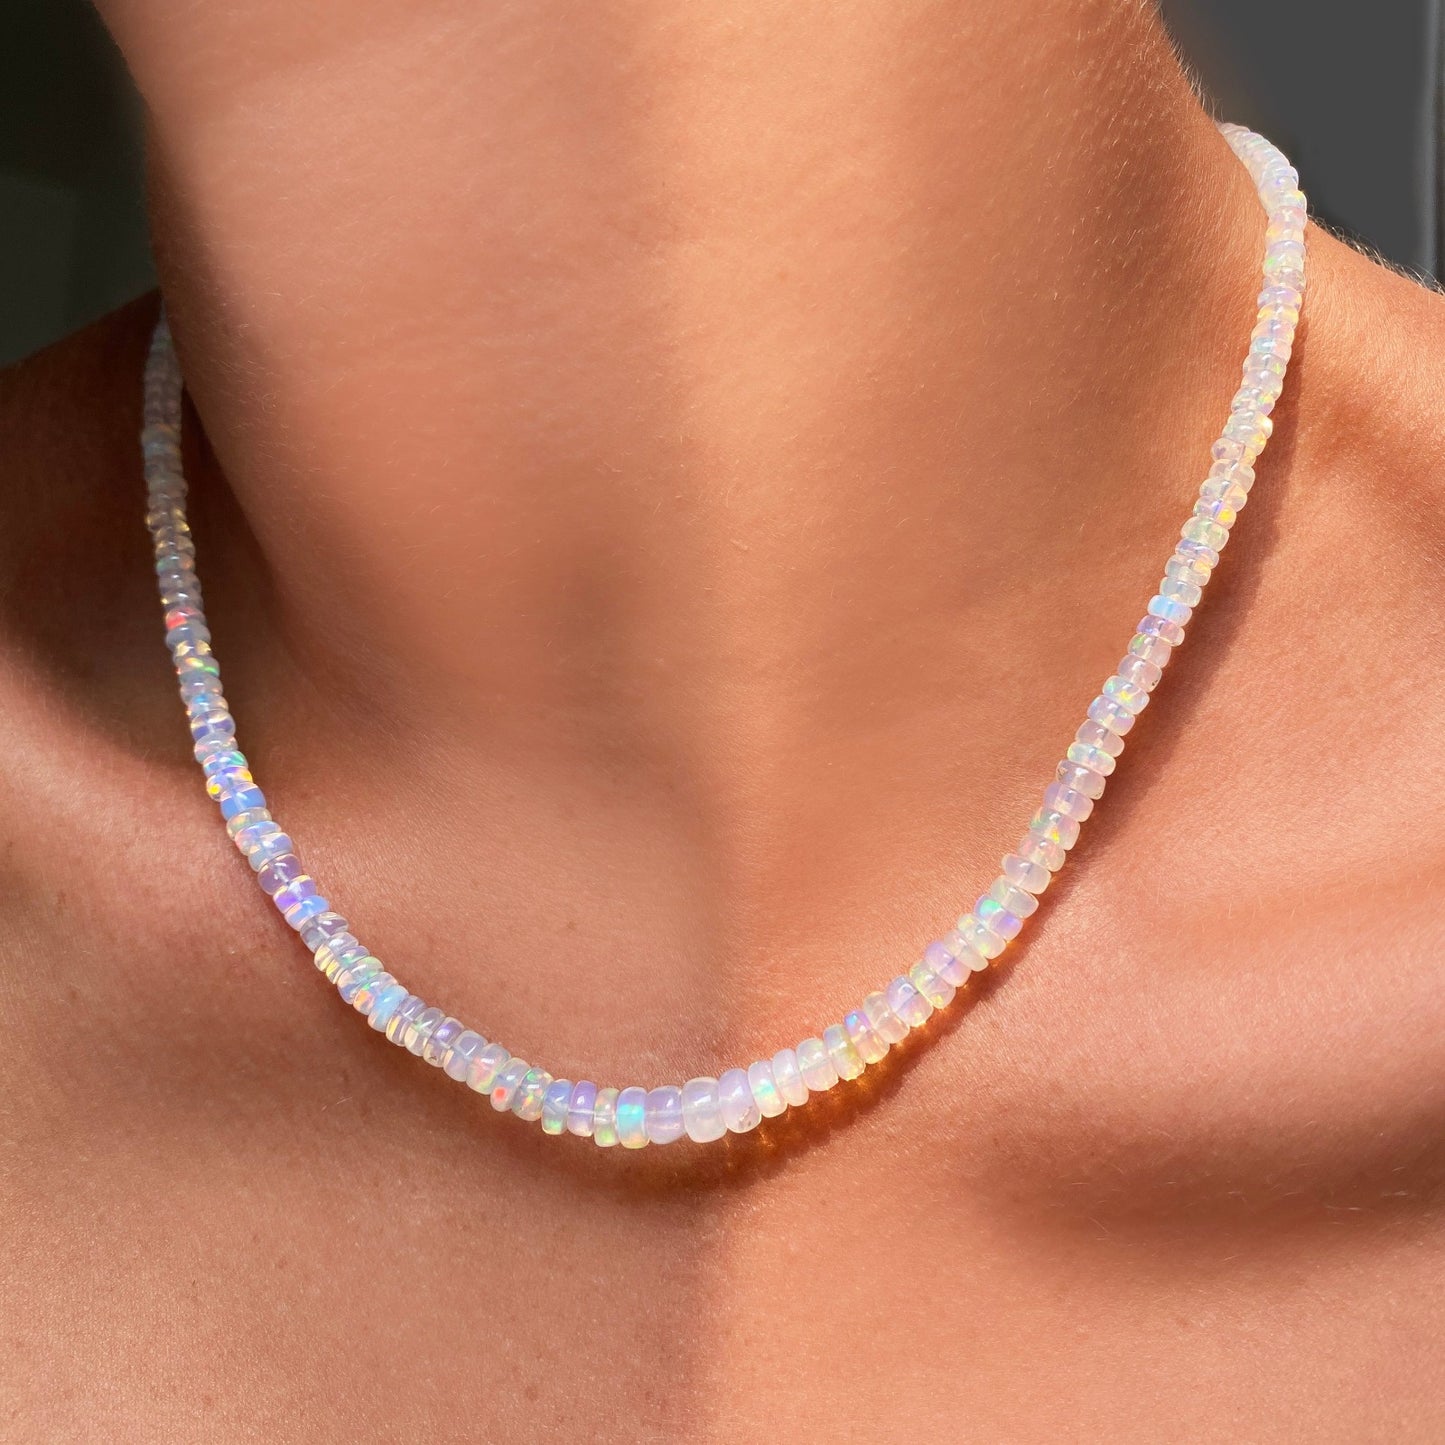 Shimmering beaded necklace made of smooth opal rondels in shades of clear opals on a slim gold lobster clasp.